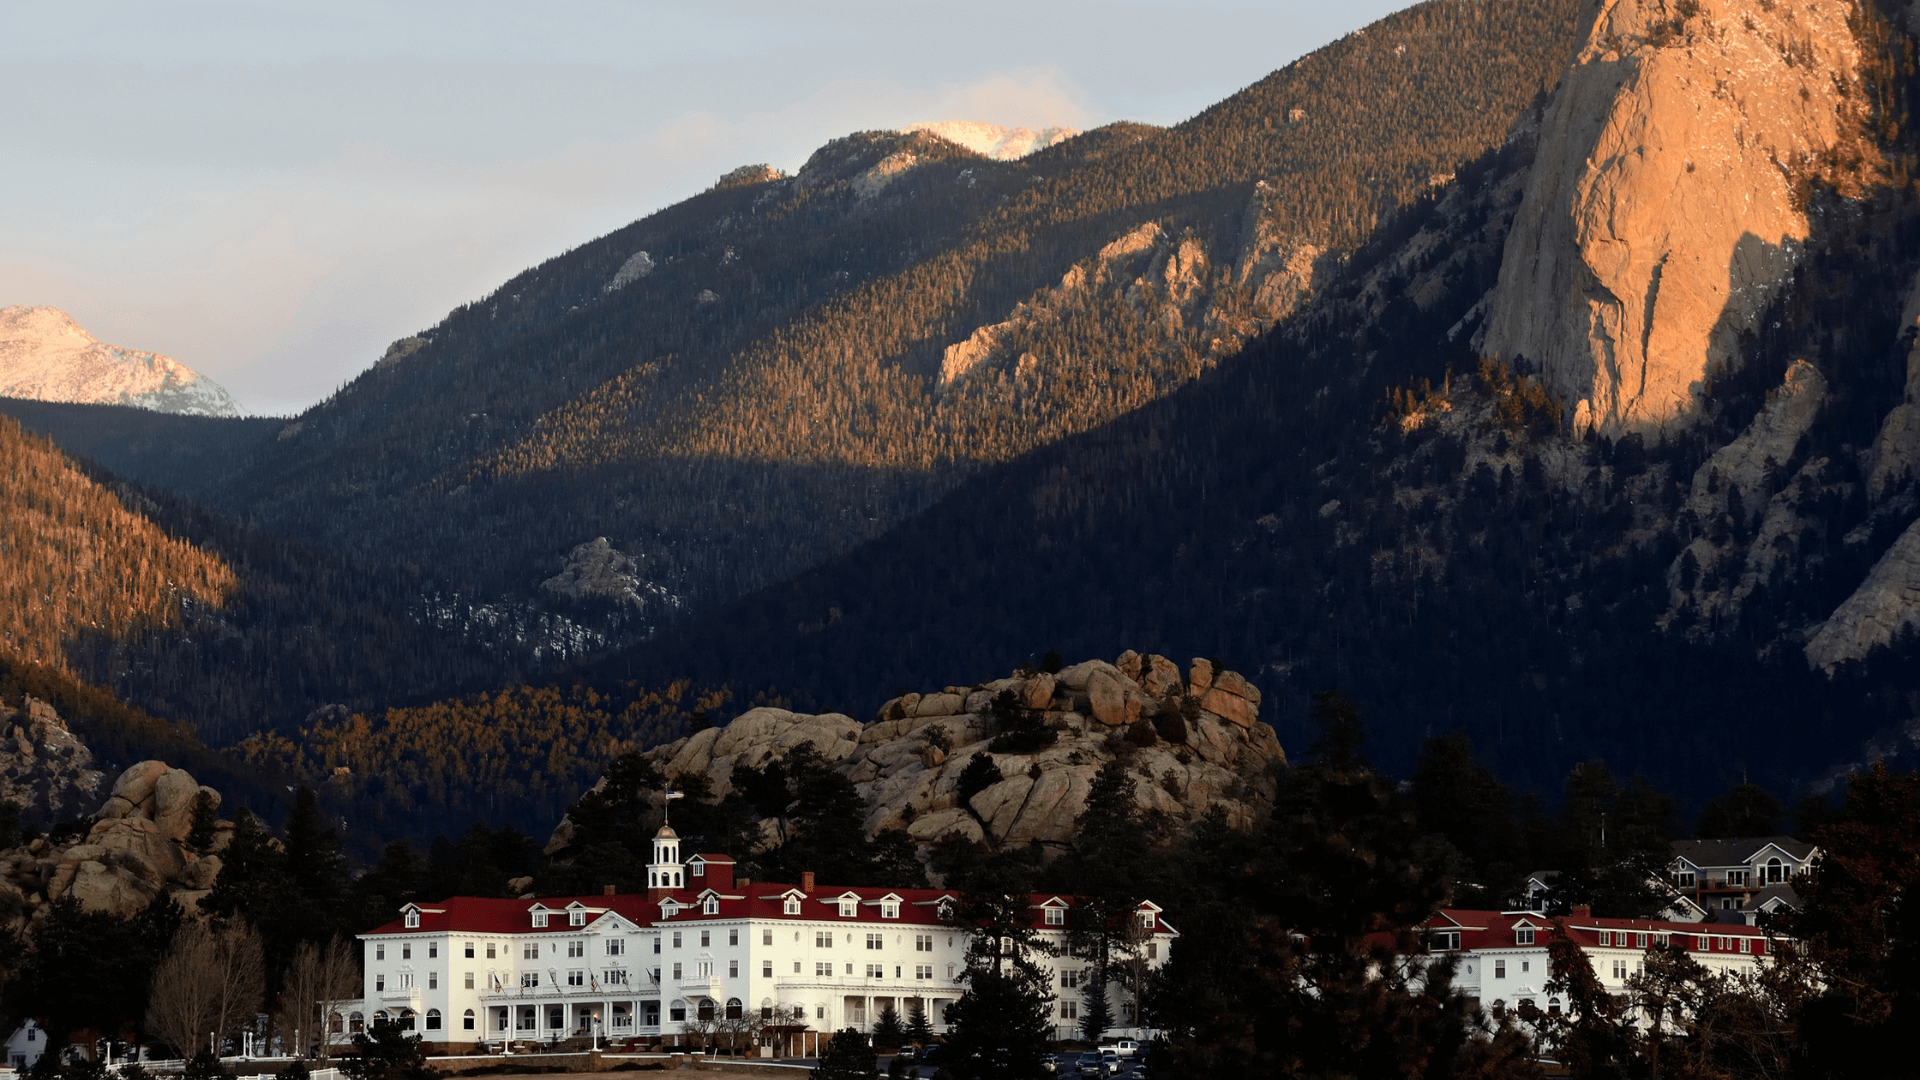 The Stanley Hotel in Colorado, which inspired Stephen King's novel "The Shining"